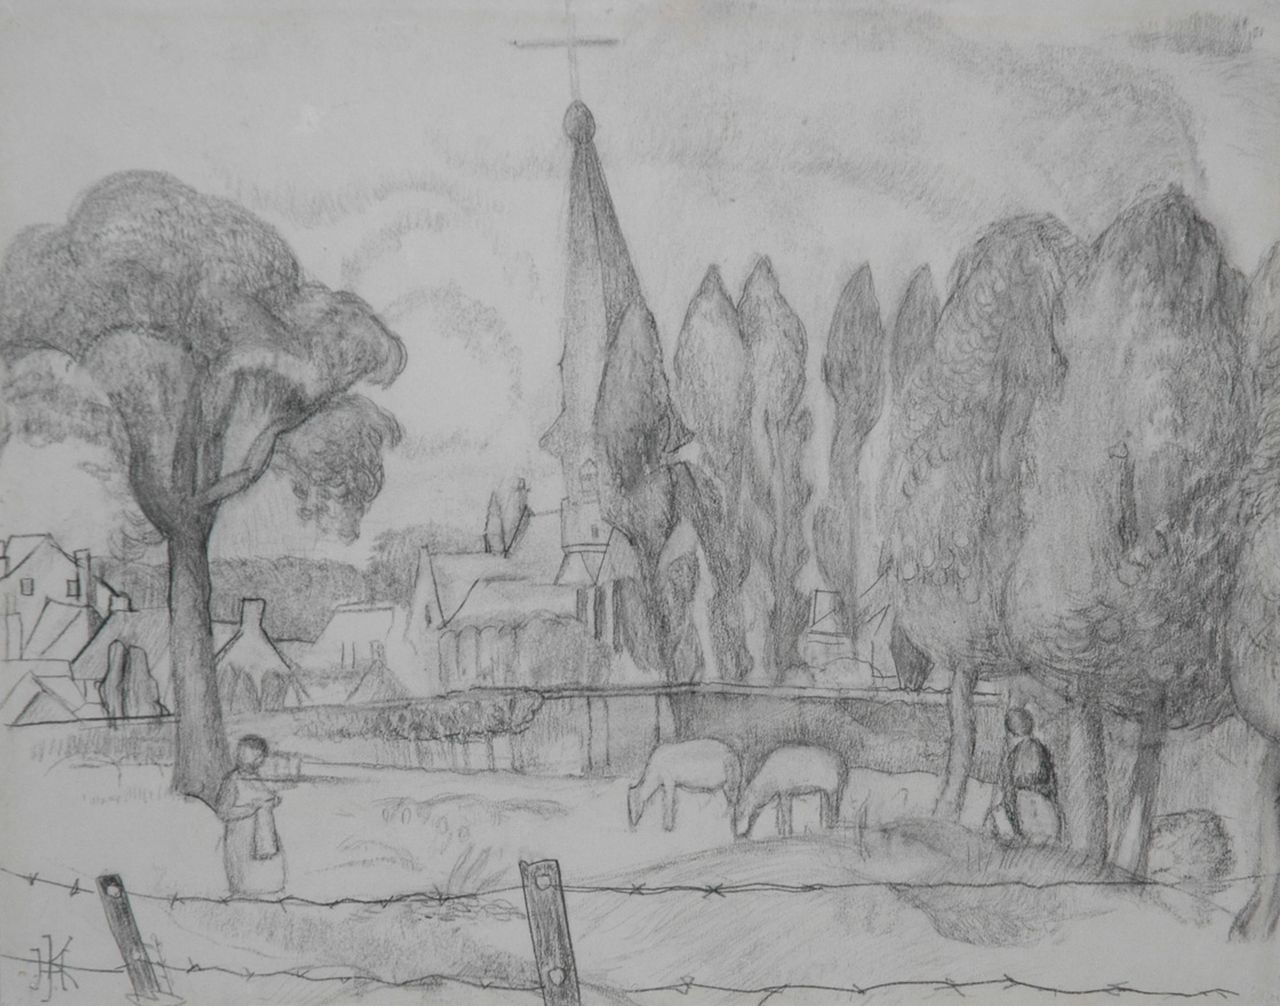 Kruyder H.J.  | 'Herman' Justus Kruyder, A Limburg landscape with a church tower, pencil on paper 26.0 x 32.8 cm, signed l.l. with monogram and painted in 1923-1927